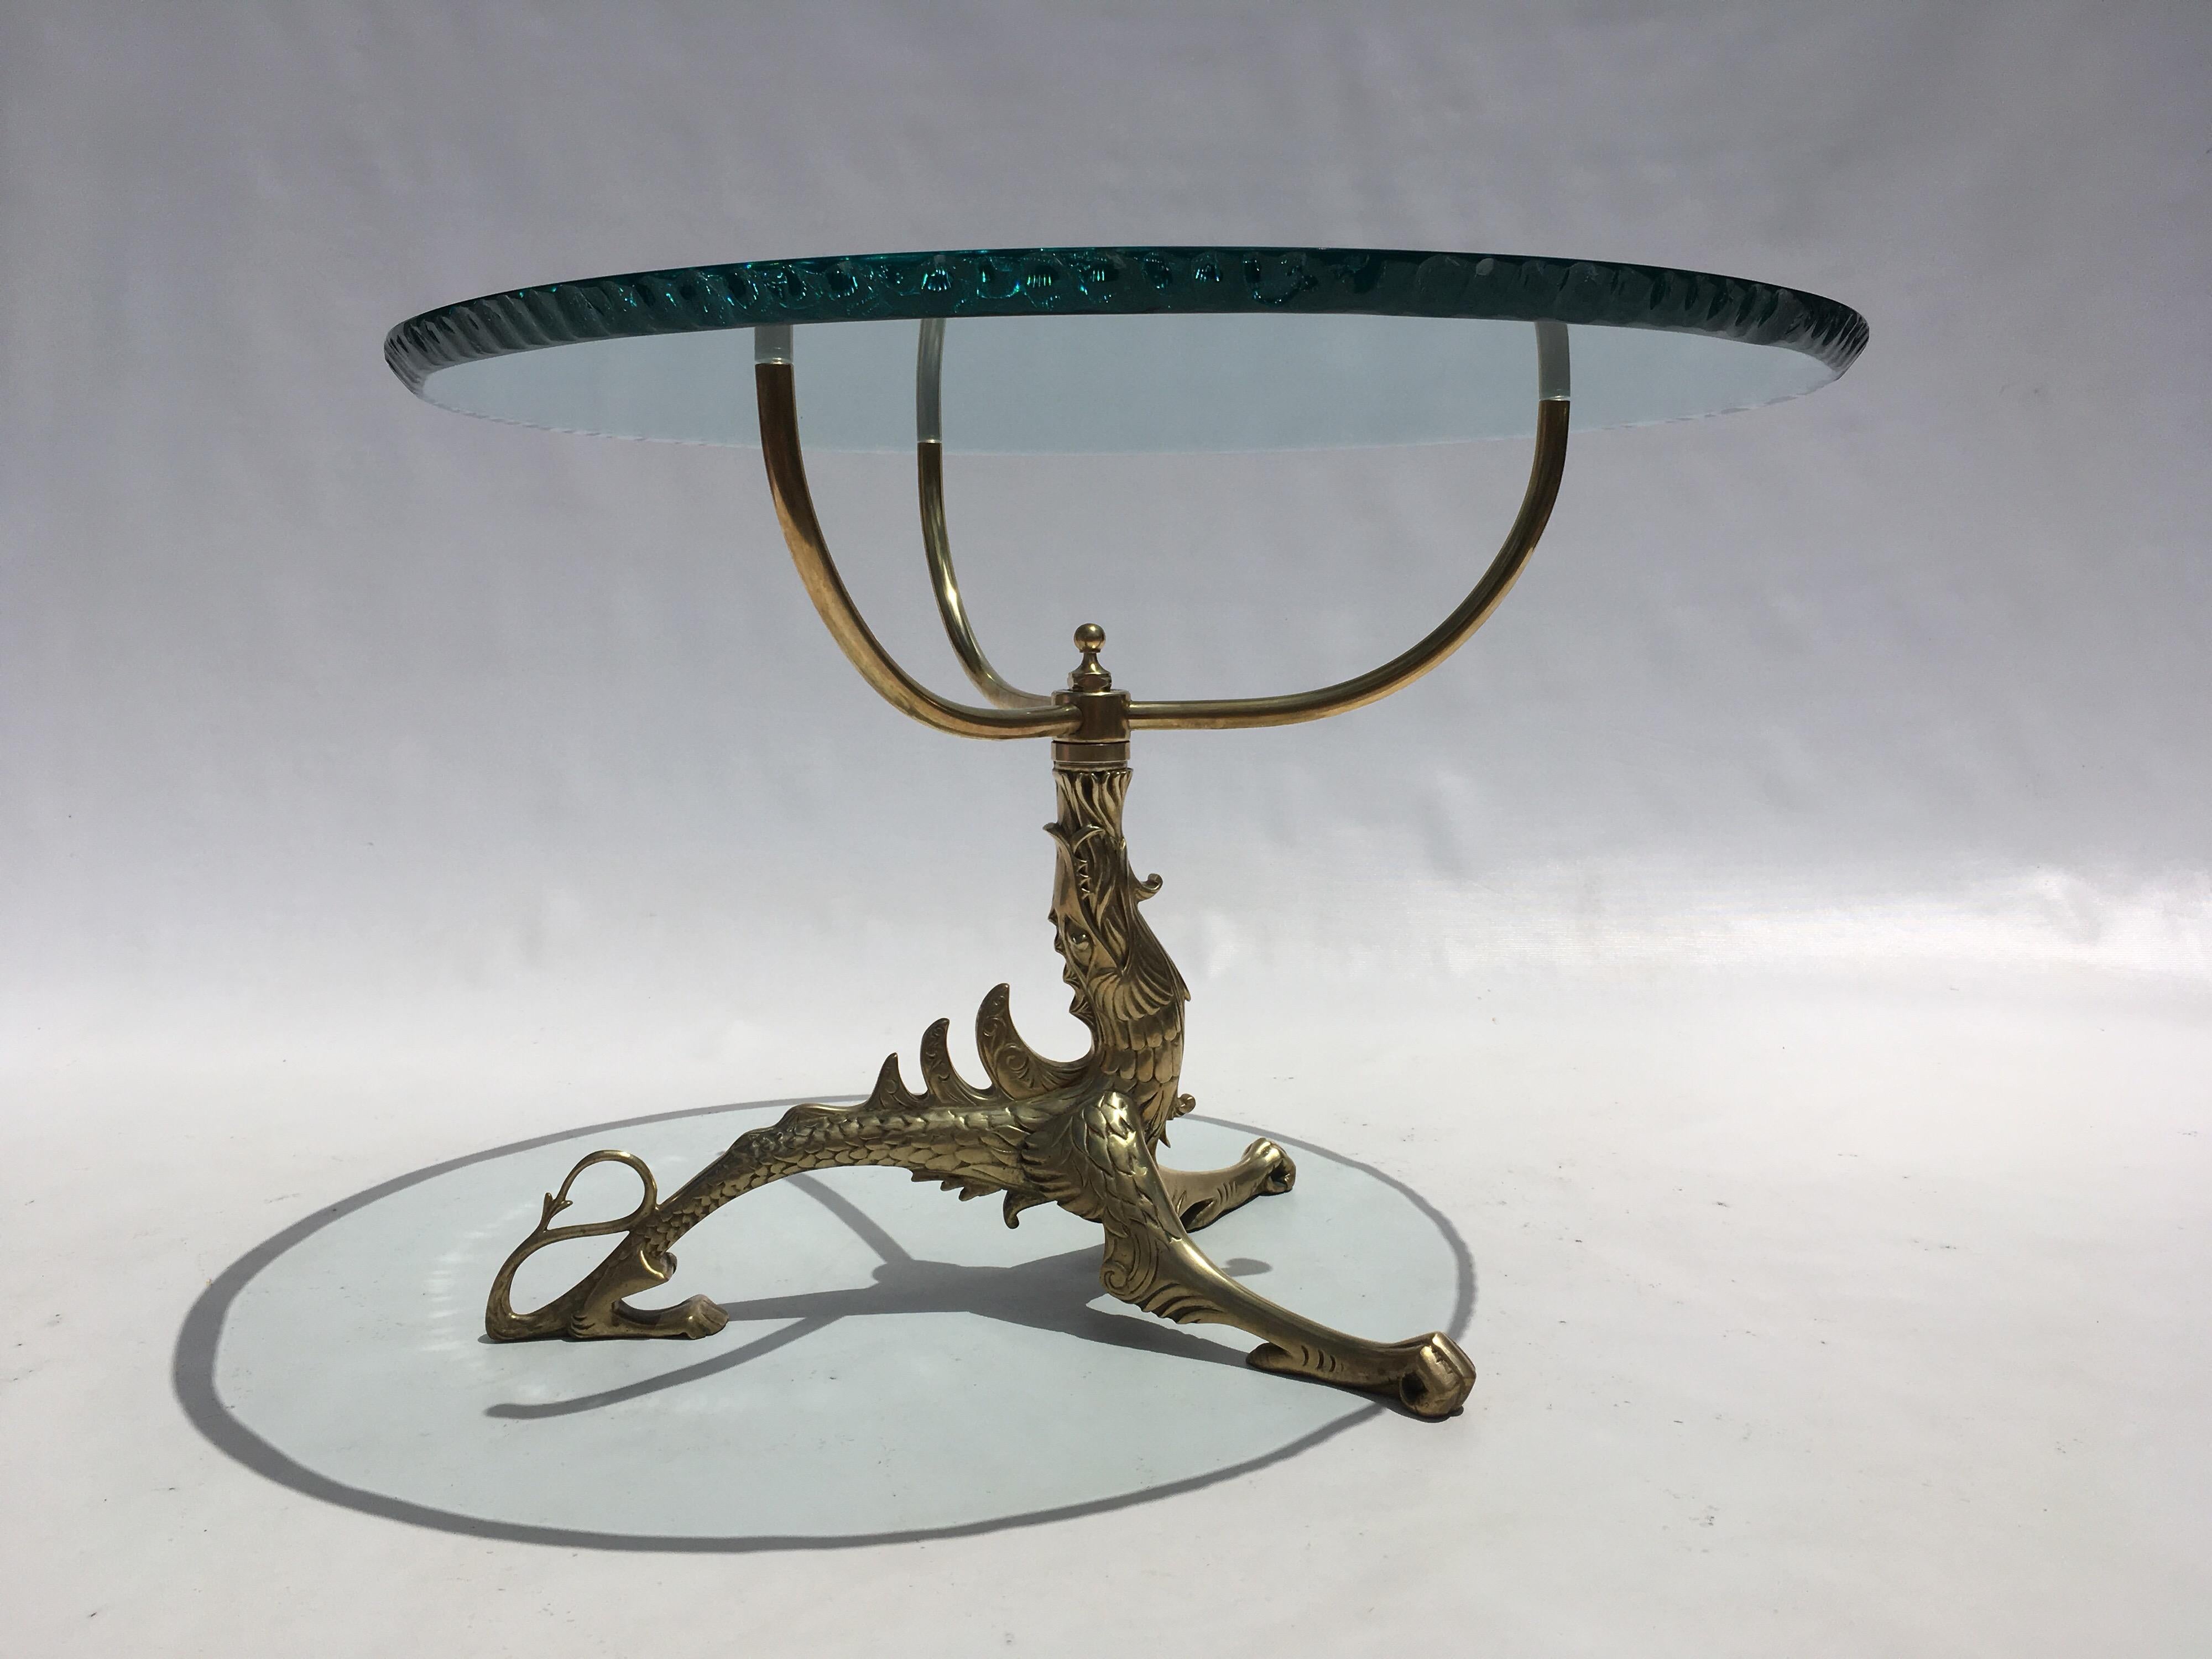 Dragon spitting fire brass table, the glass top has a chipped edge design.